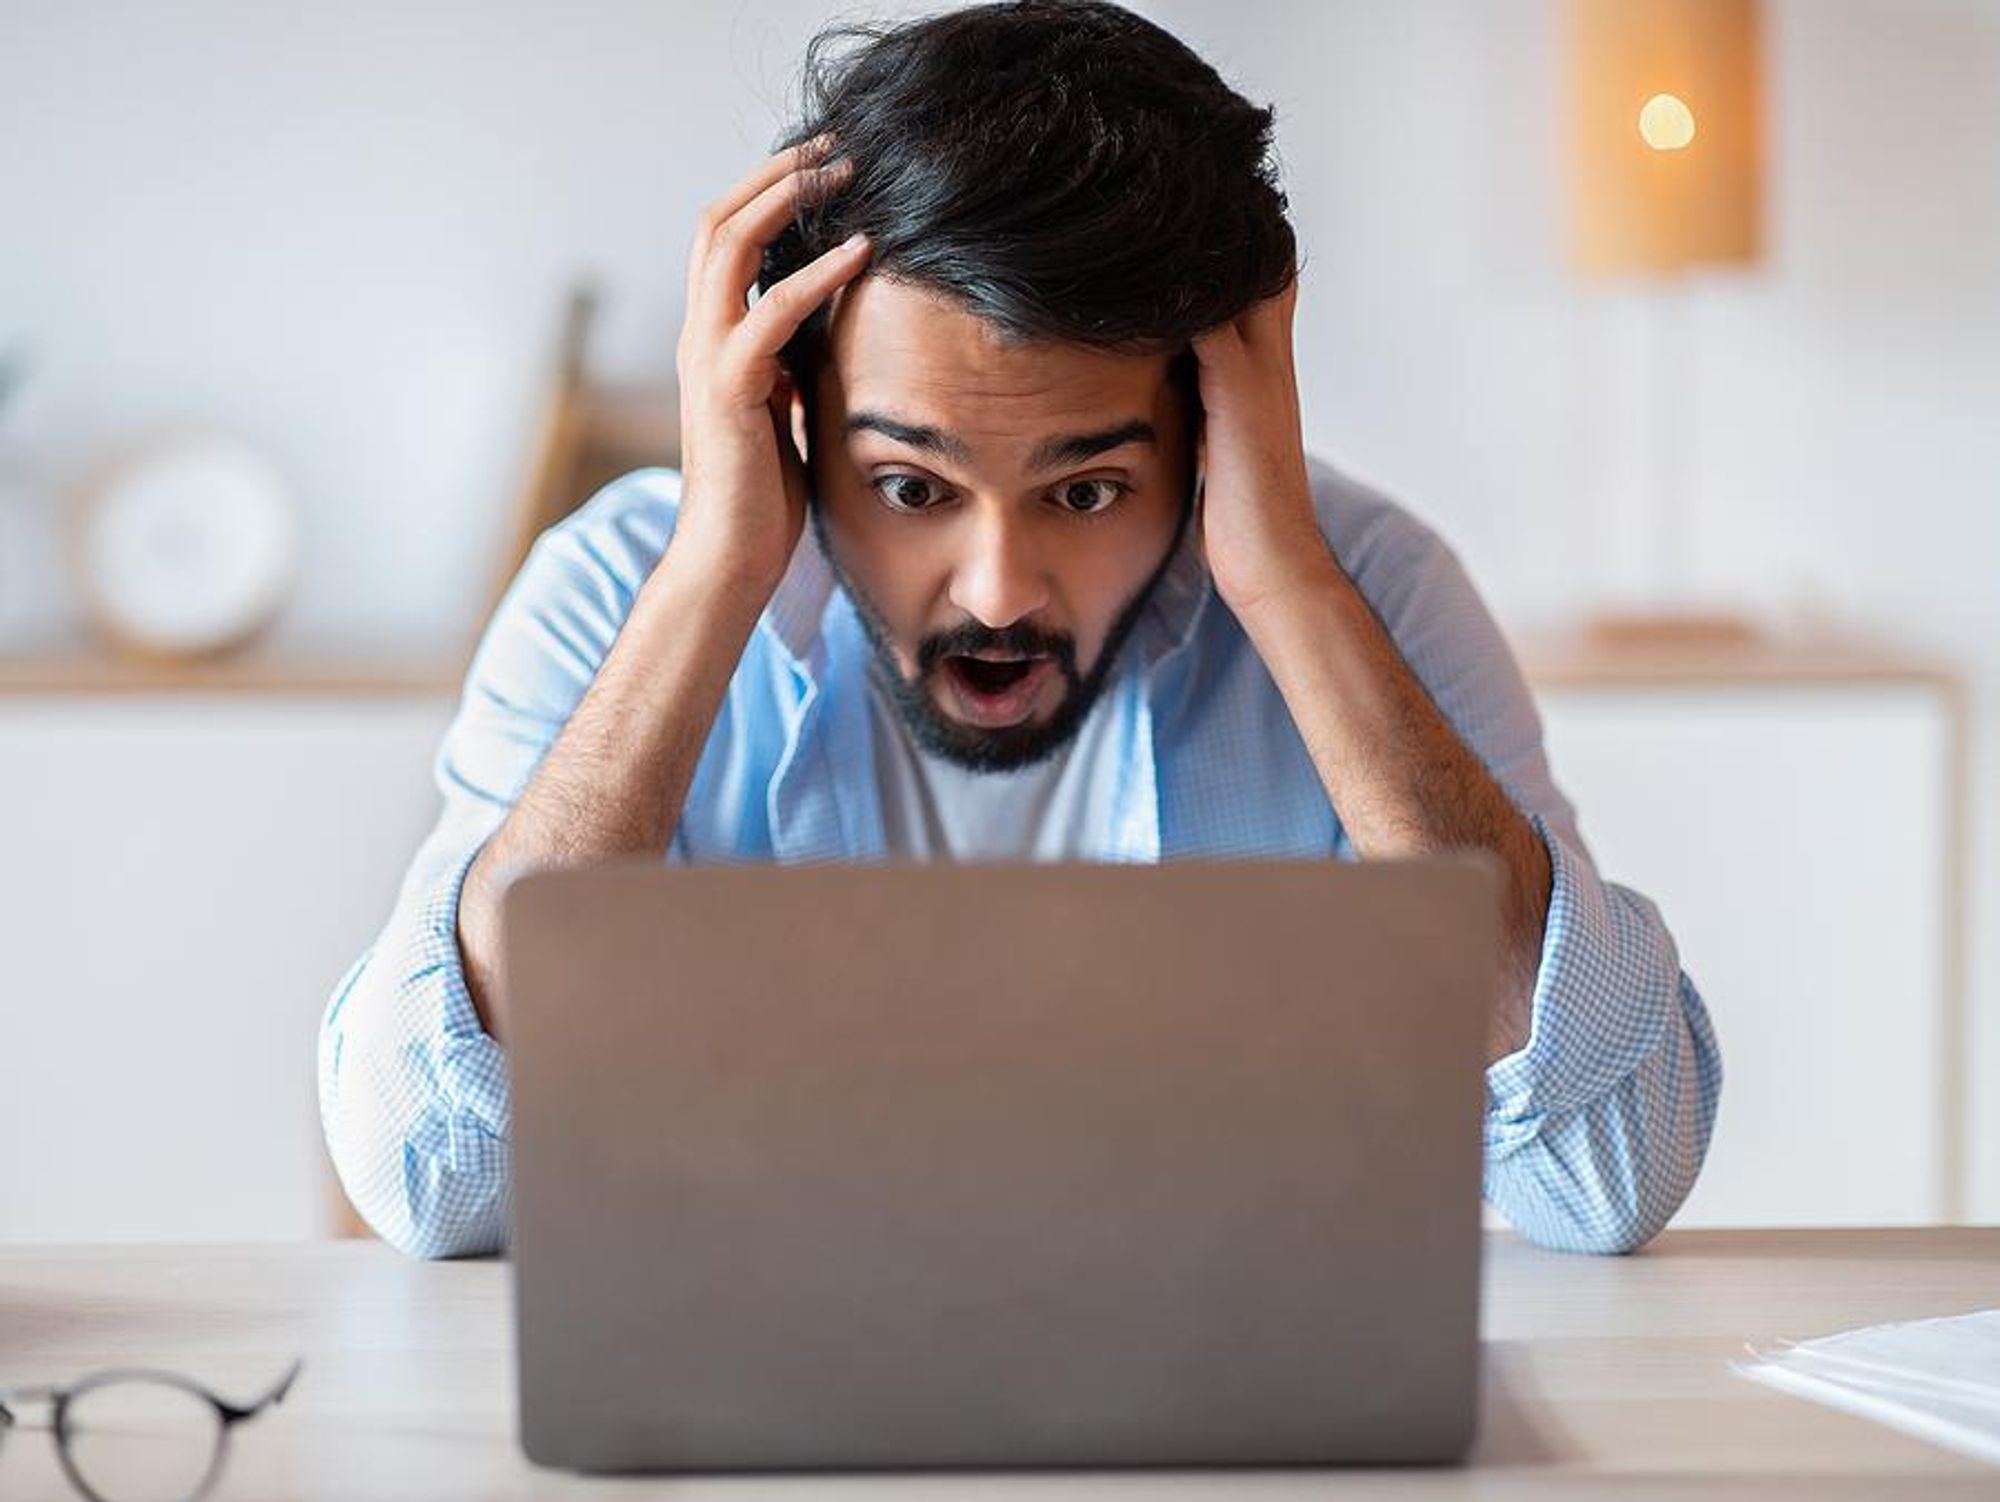 Frustrated man on laptop is miserable at work